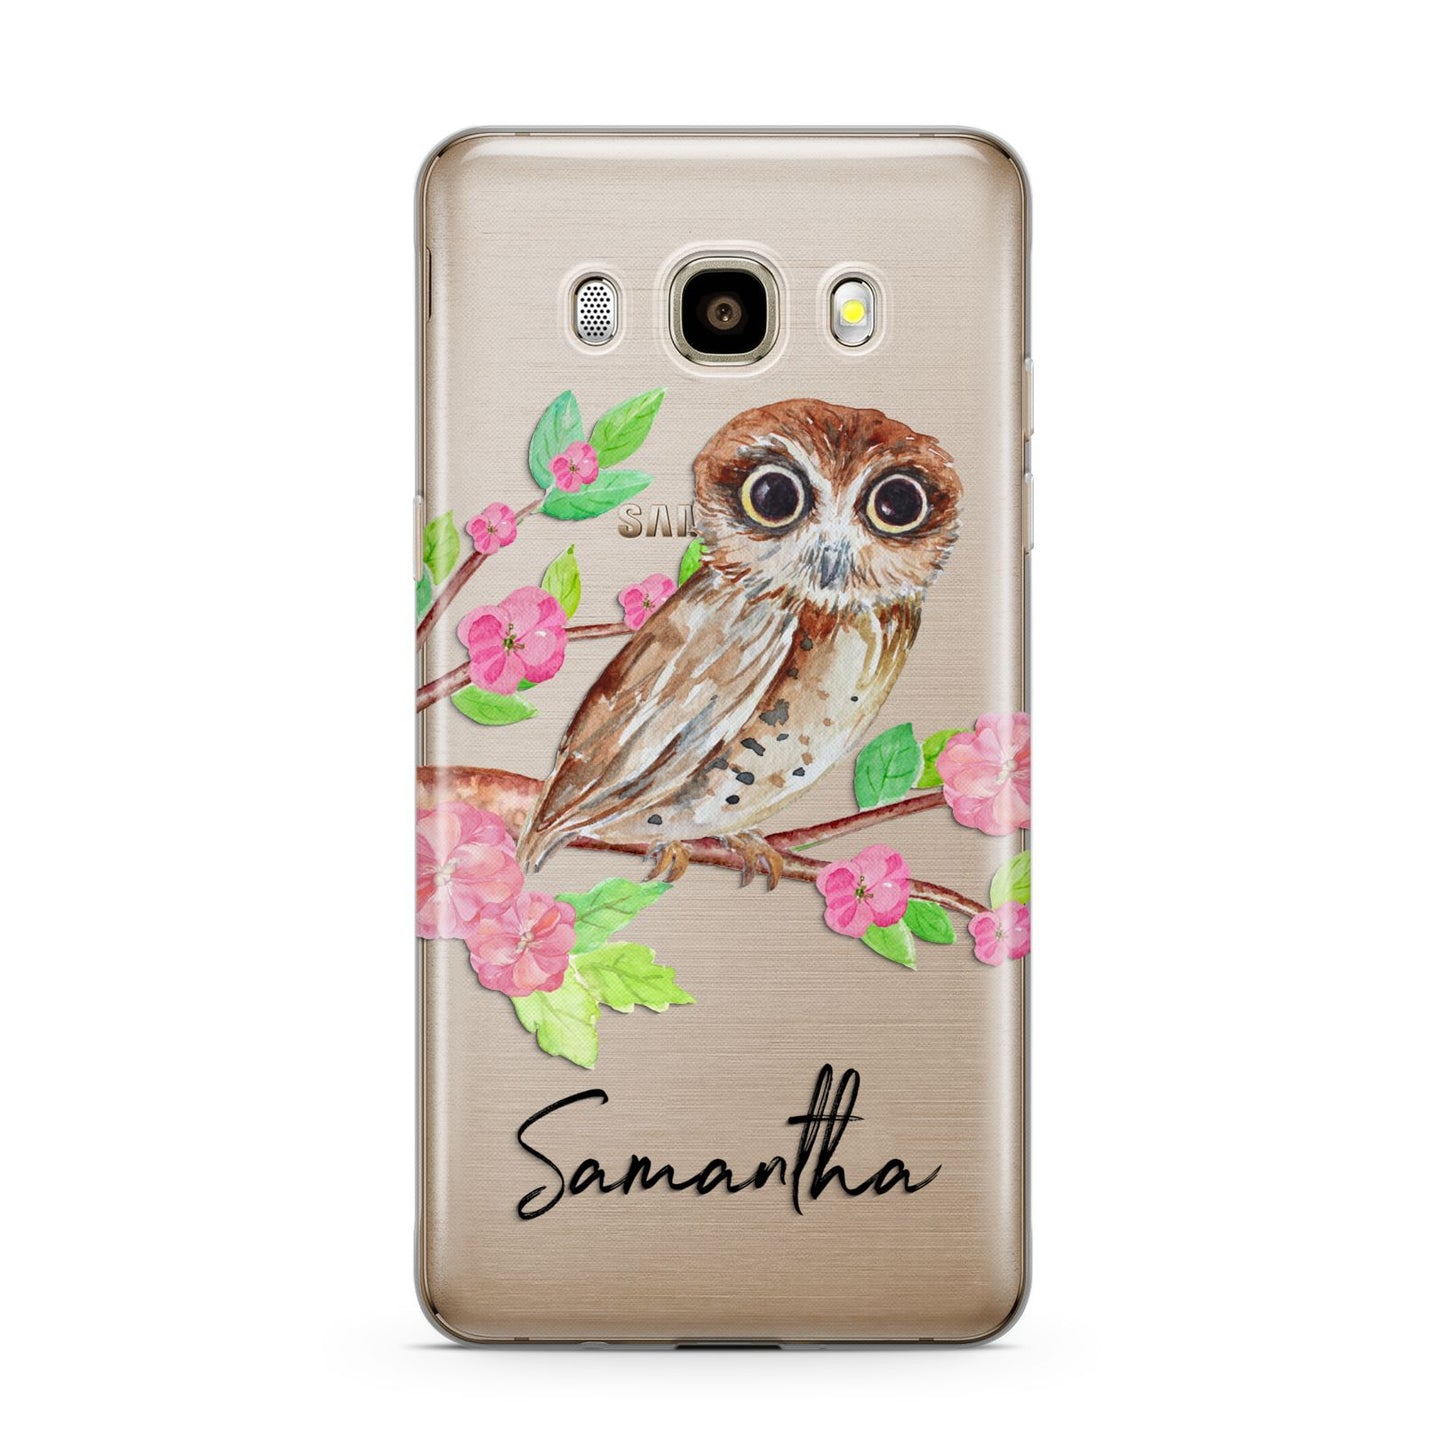 Personalised Owl Samsung Galaxy J7 2016 Case on gold phone